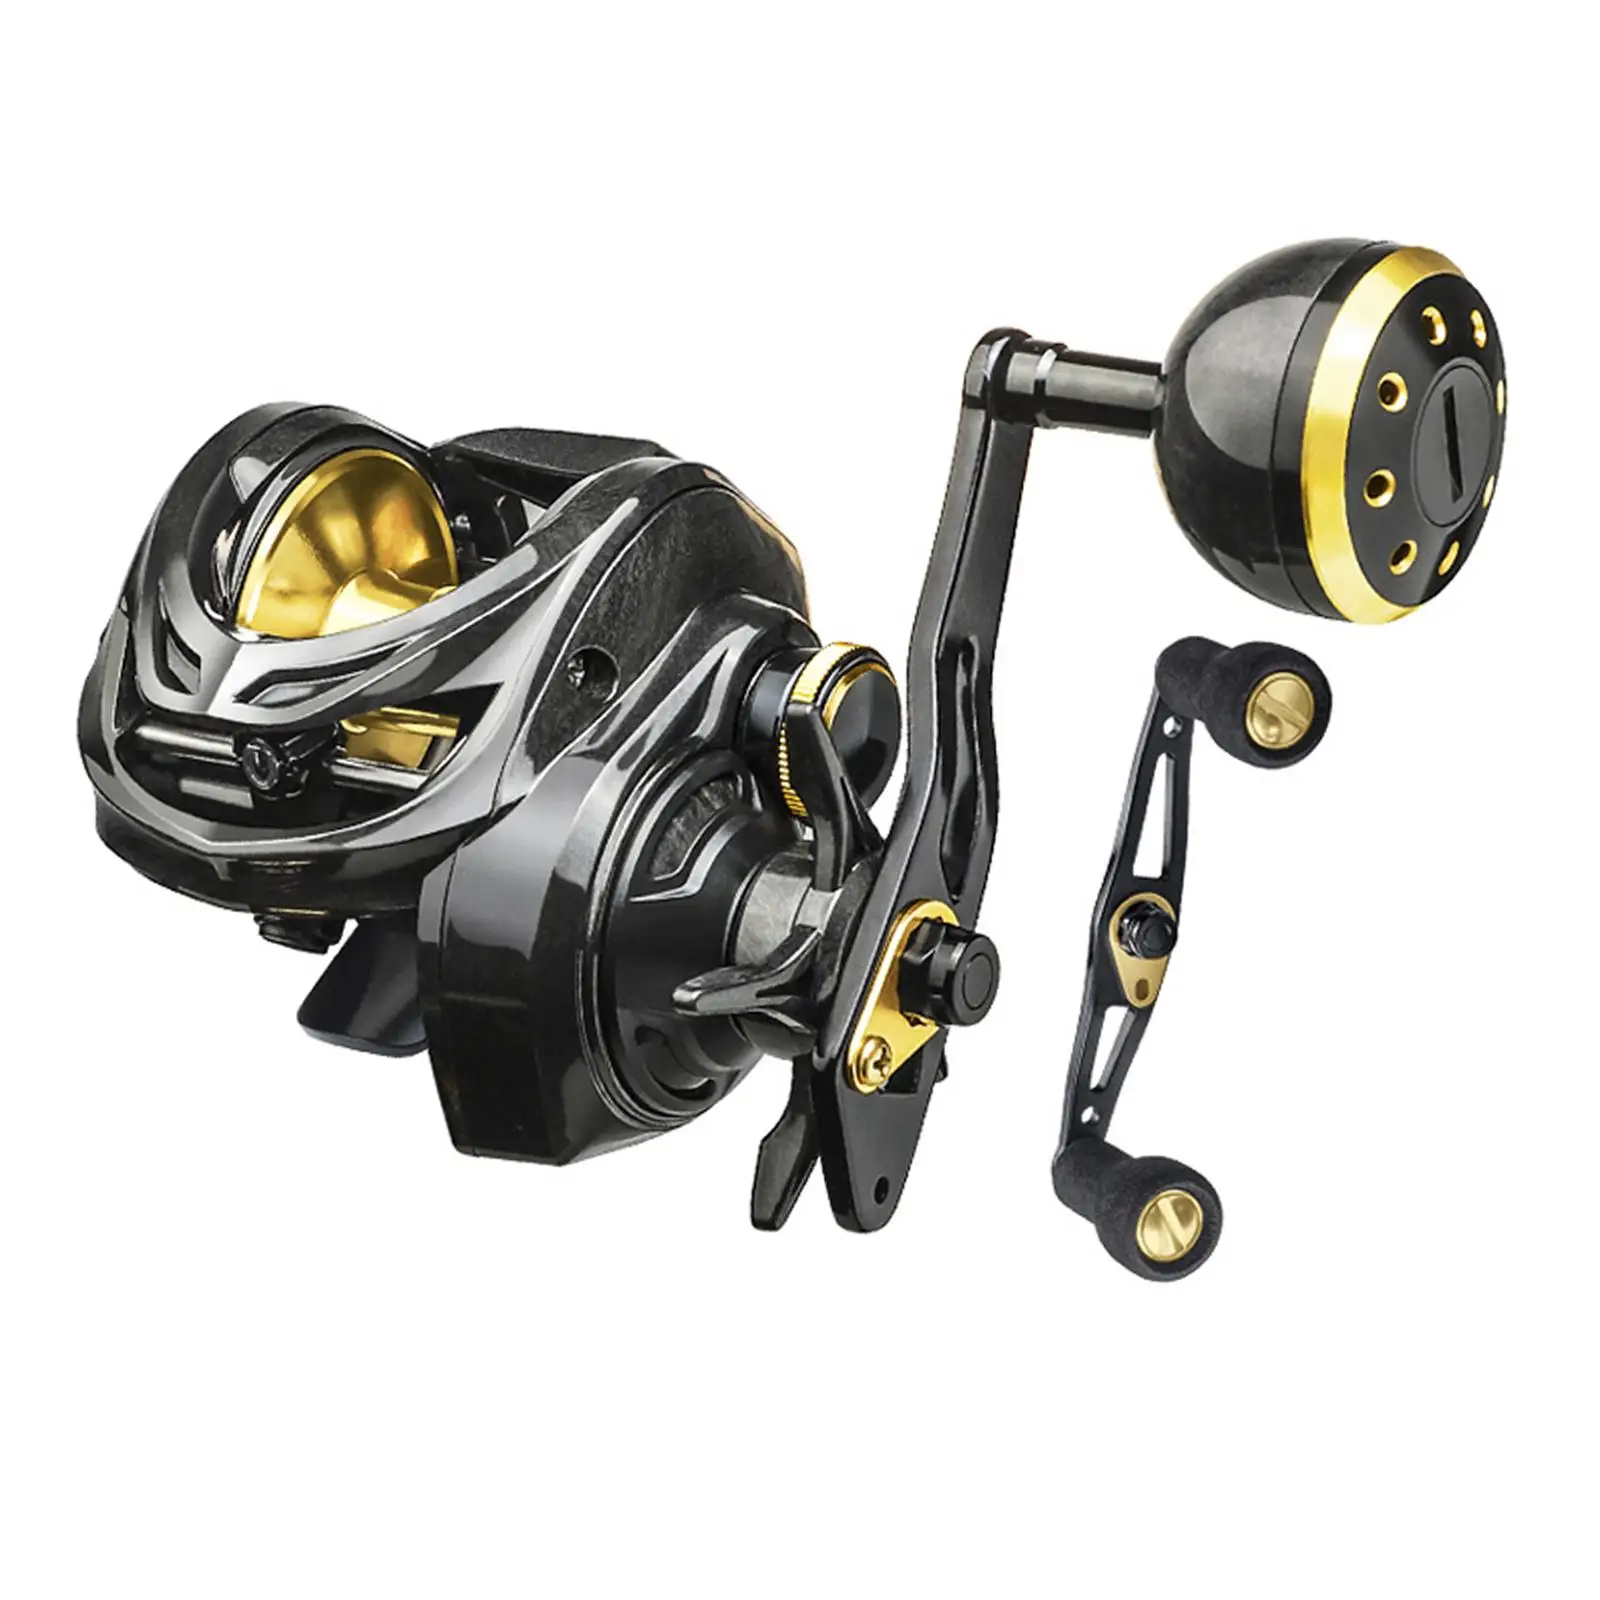 6.3:1 Gear Ratio 6+1BB Durable Comfortable Handle Compact Design Sealed Drag System Casting Reel Baitcaster Reel for Sea Fishing